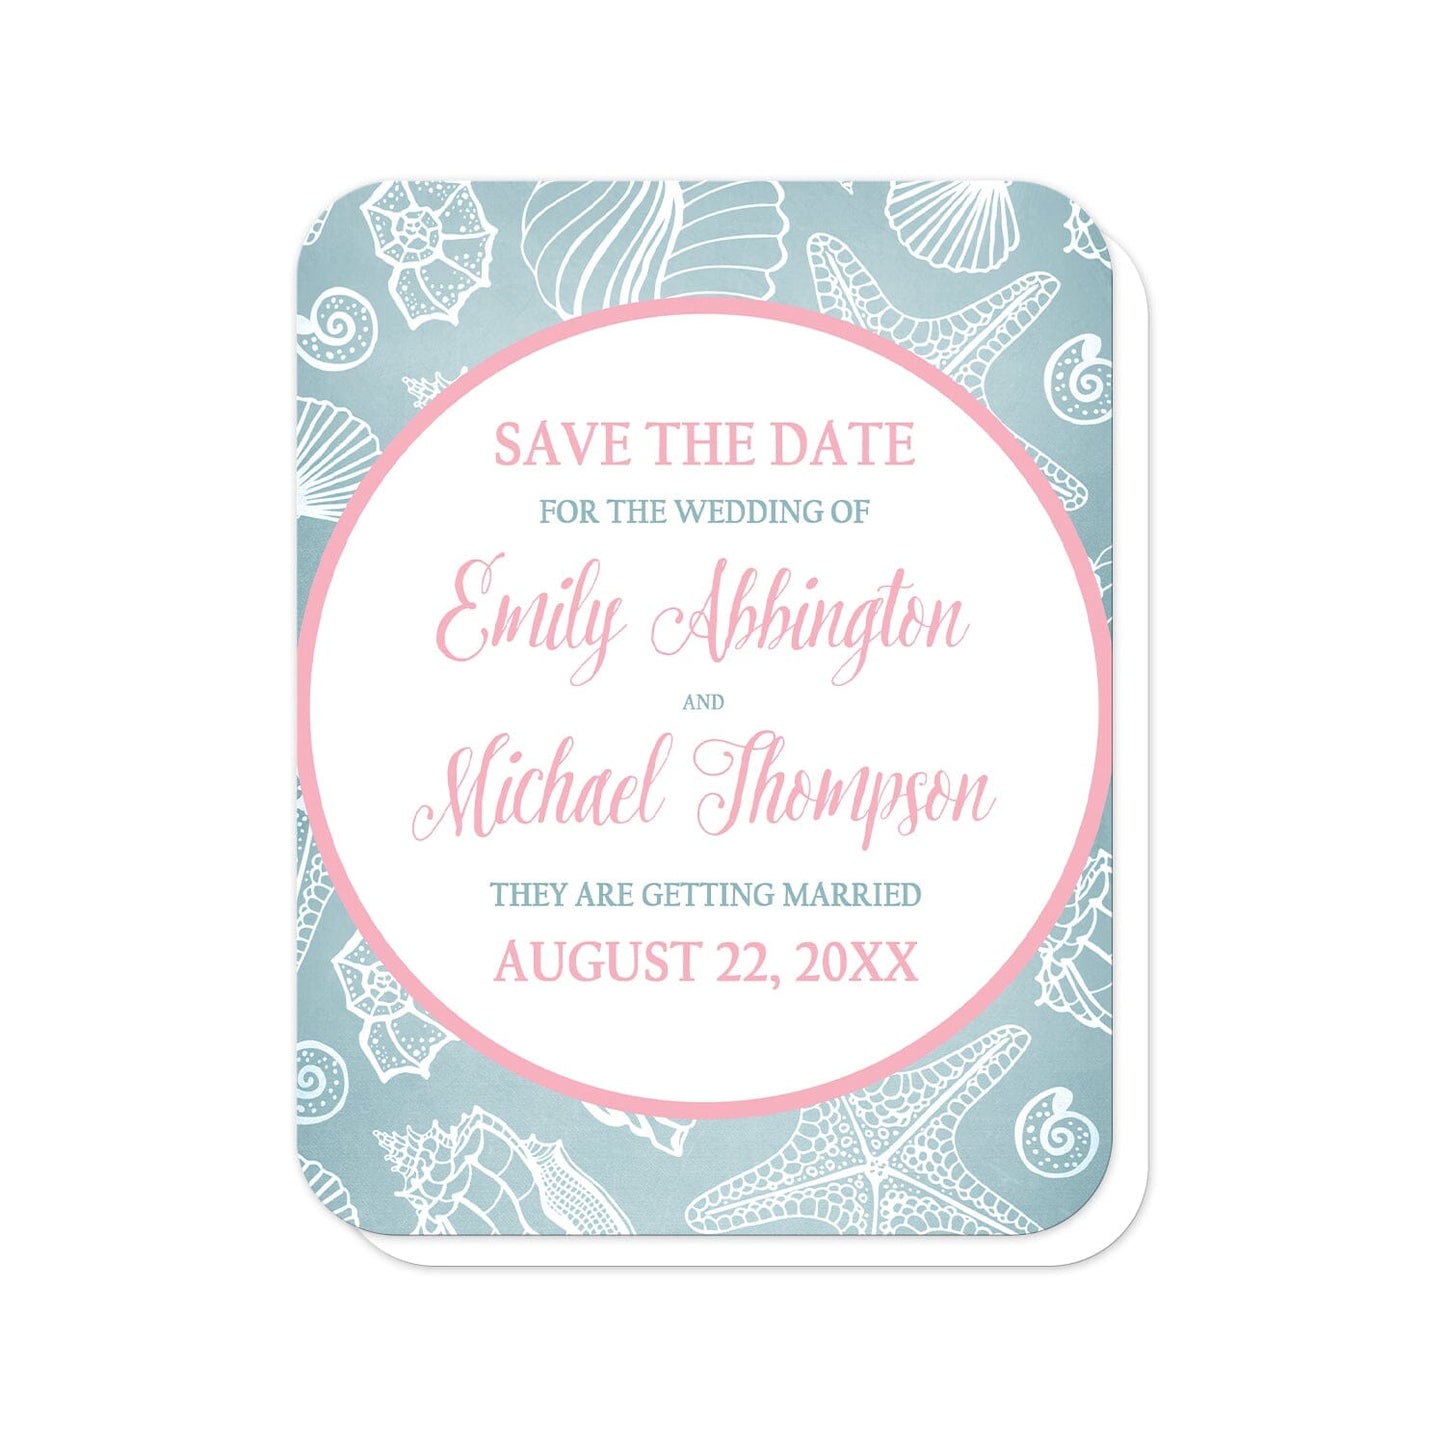 Blue Seashell Pink Beach Save the Date Cards (with rounded corners) at Artistically Invited. Blue seashell pink beach save the date cards designed with your personalized wedding announcement details custom printed in pink and blue, inside a pink outlined white circle, over a blue and white seashell pattern background.